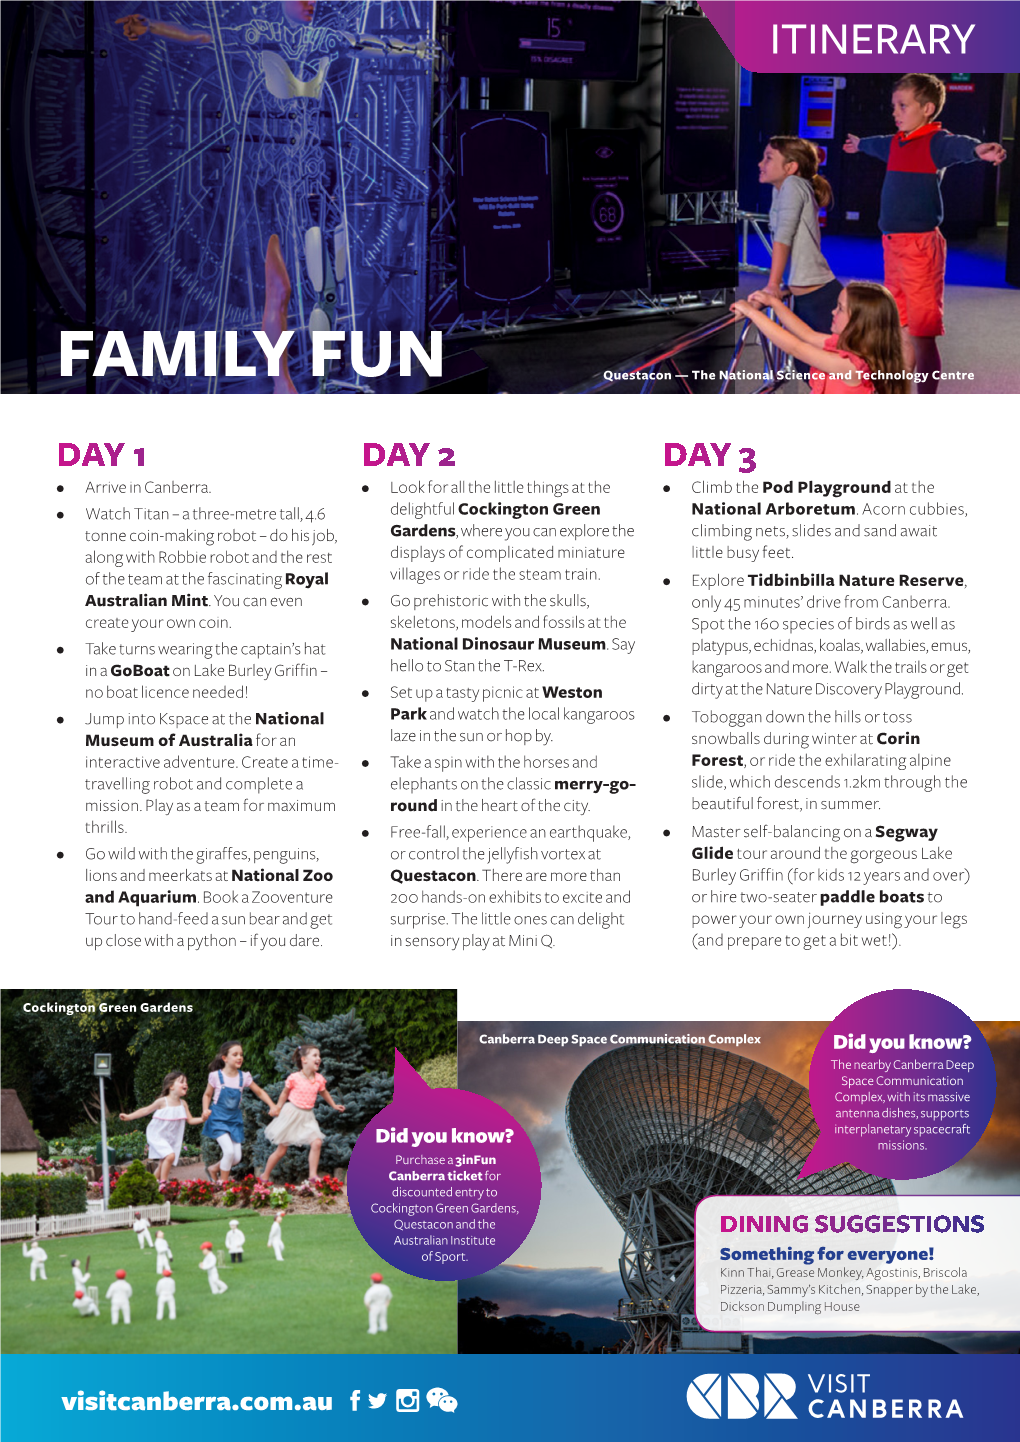 FEATURED Family Fun 2 Day Itinerary